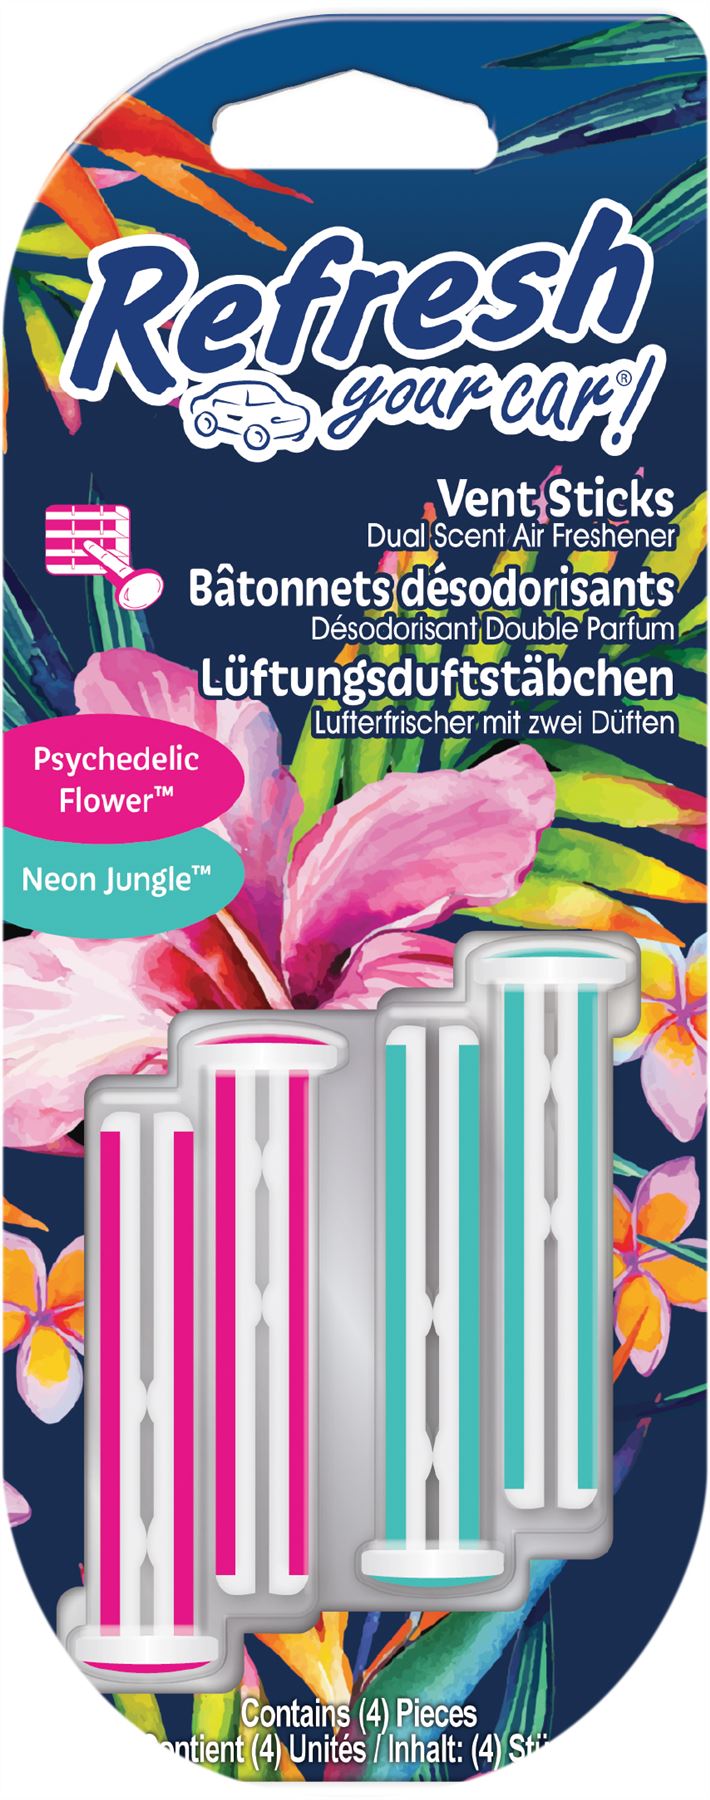 Refresh Your Car 301411400 Air freshener Vent Stick 4 Pack Psychedelic Flower/Neon Jungle